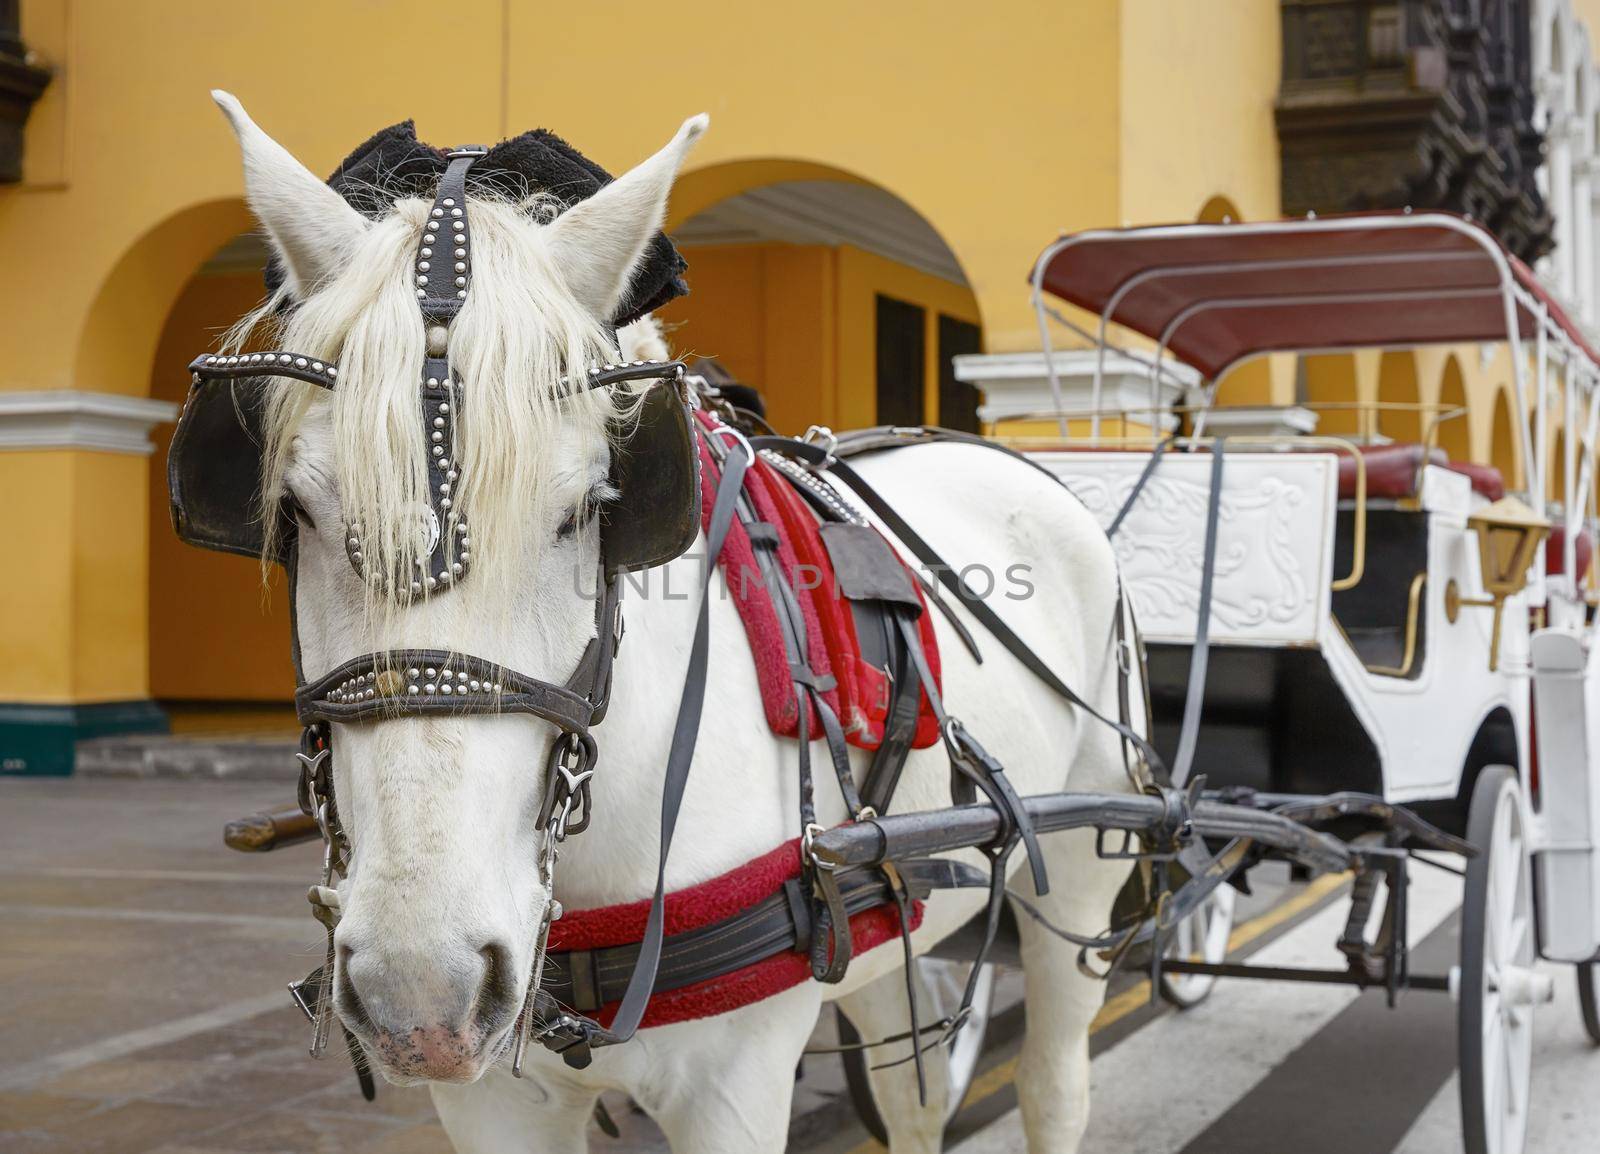 Traditional Horse-Drawn Vehicle in Lima, Peru. A Beautiful White Horse Hitched to a Four Wheel Carriage. 